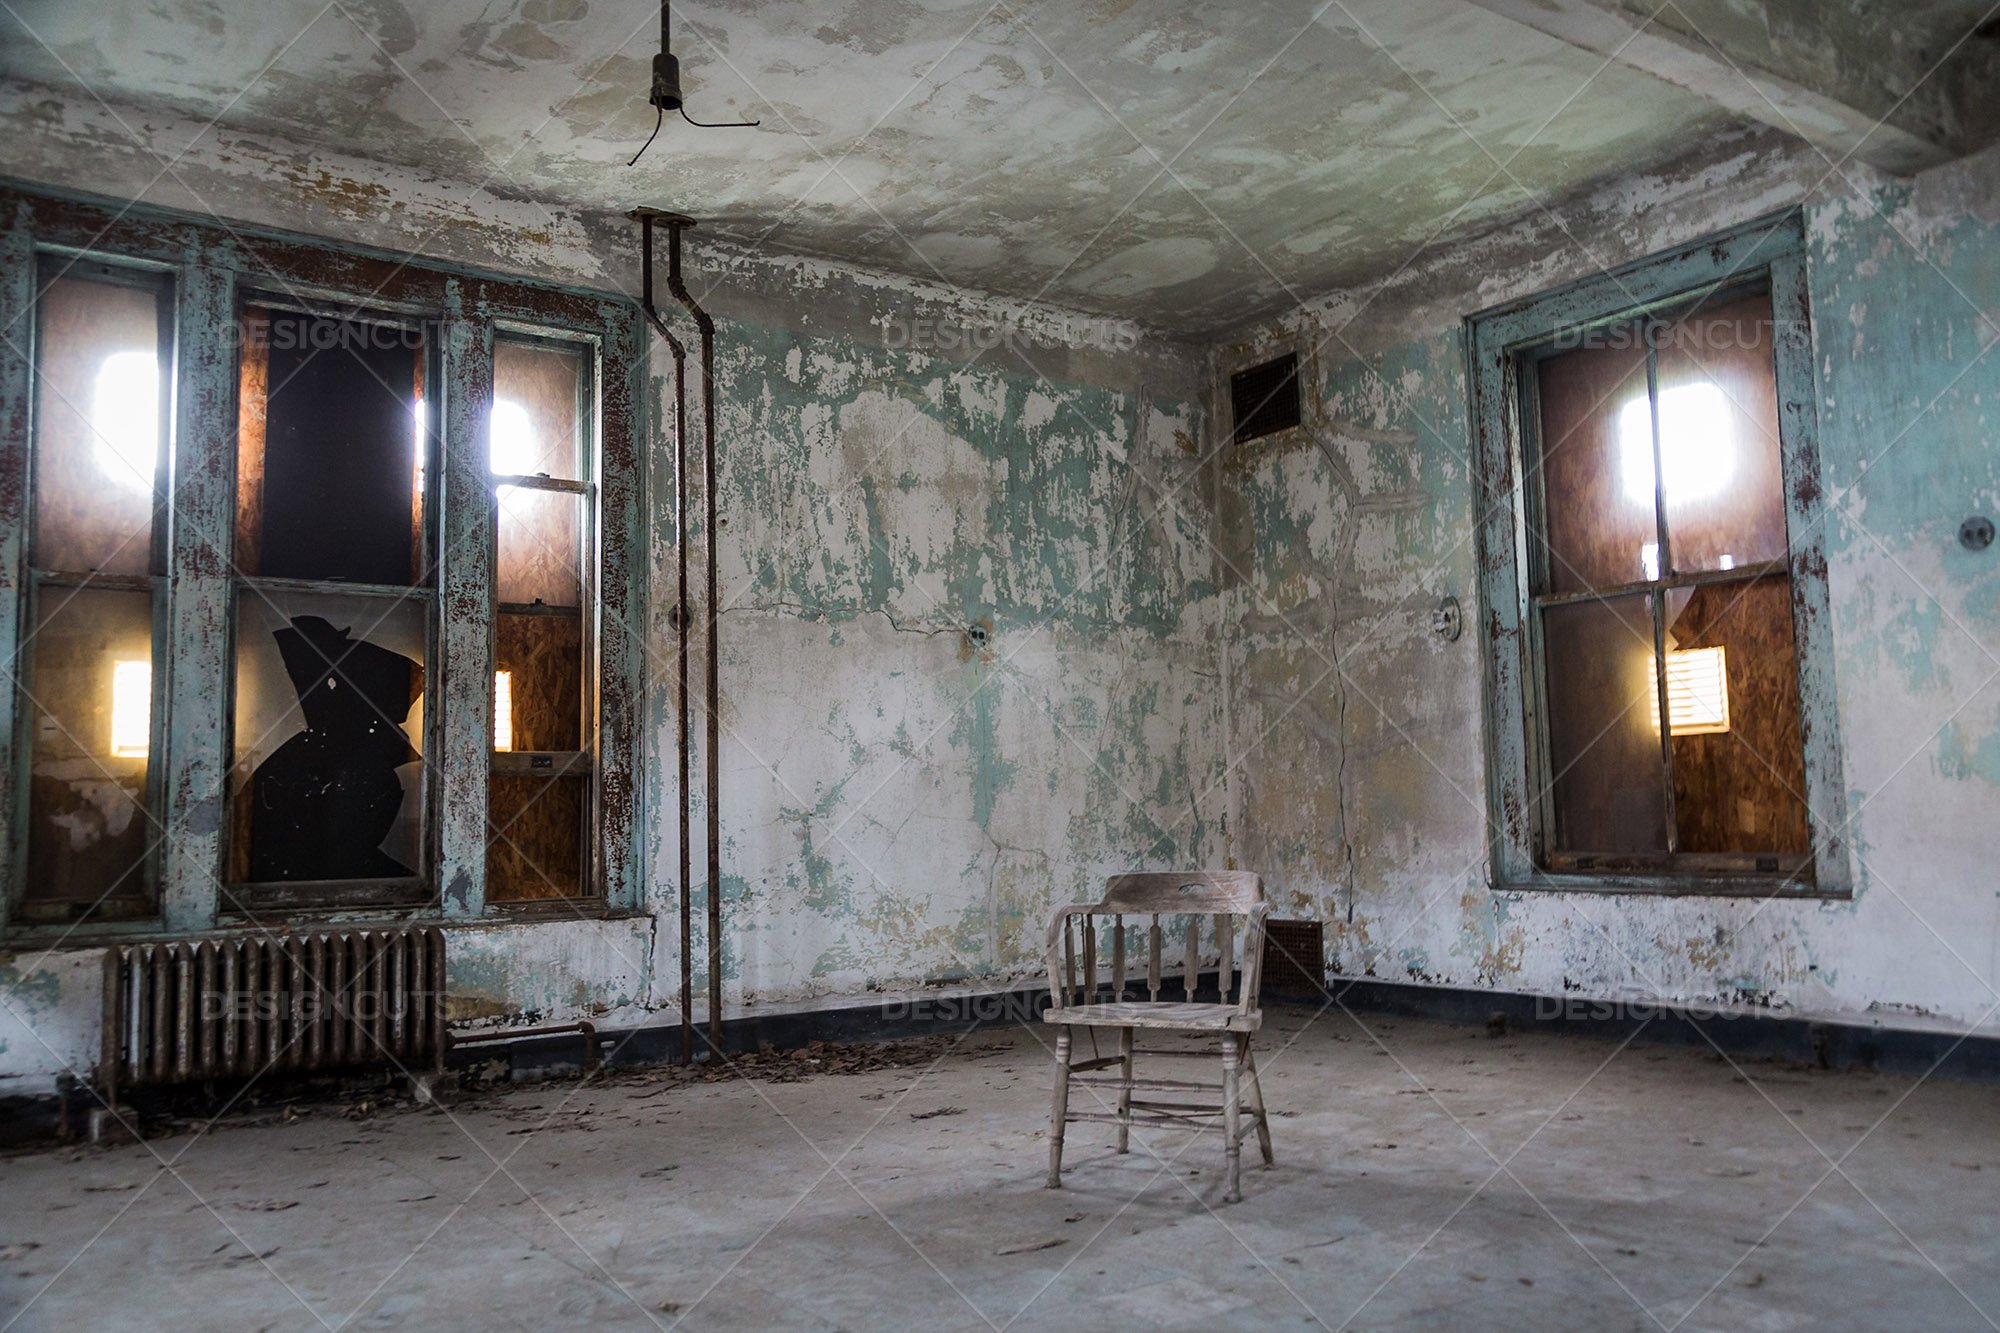 A Lone Chair In An Empty Room In The Derelict Ellis Island Immigration Hospital